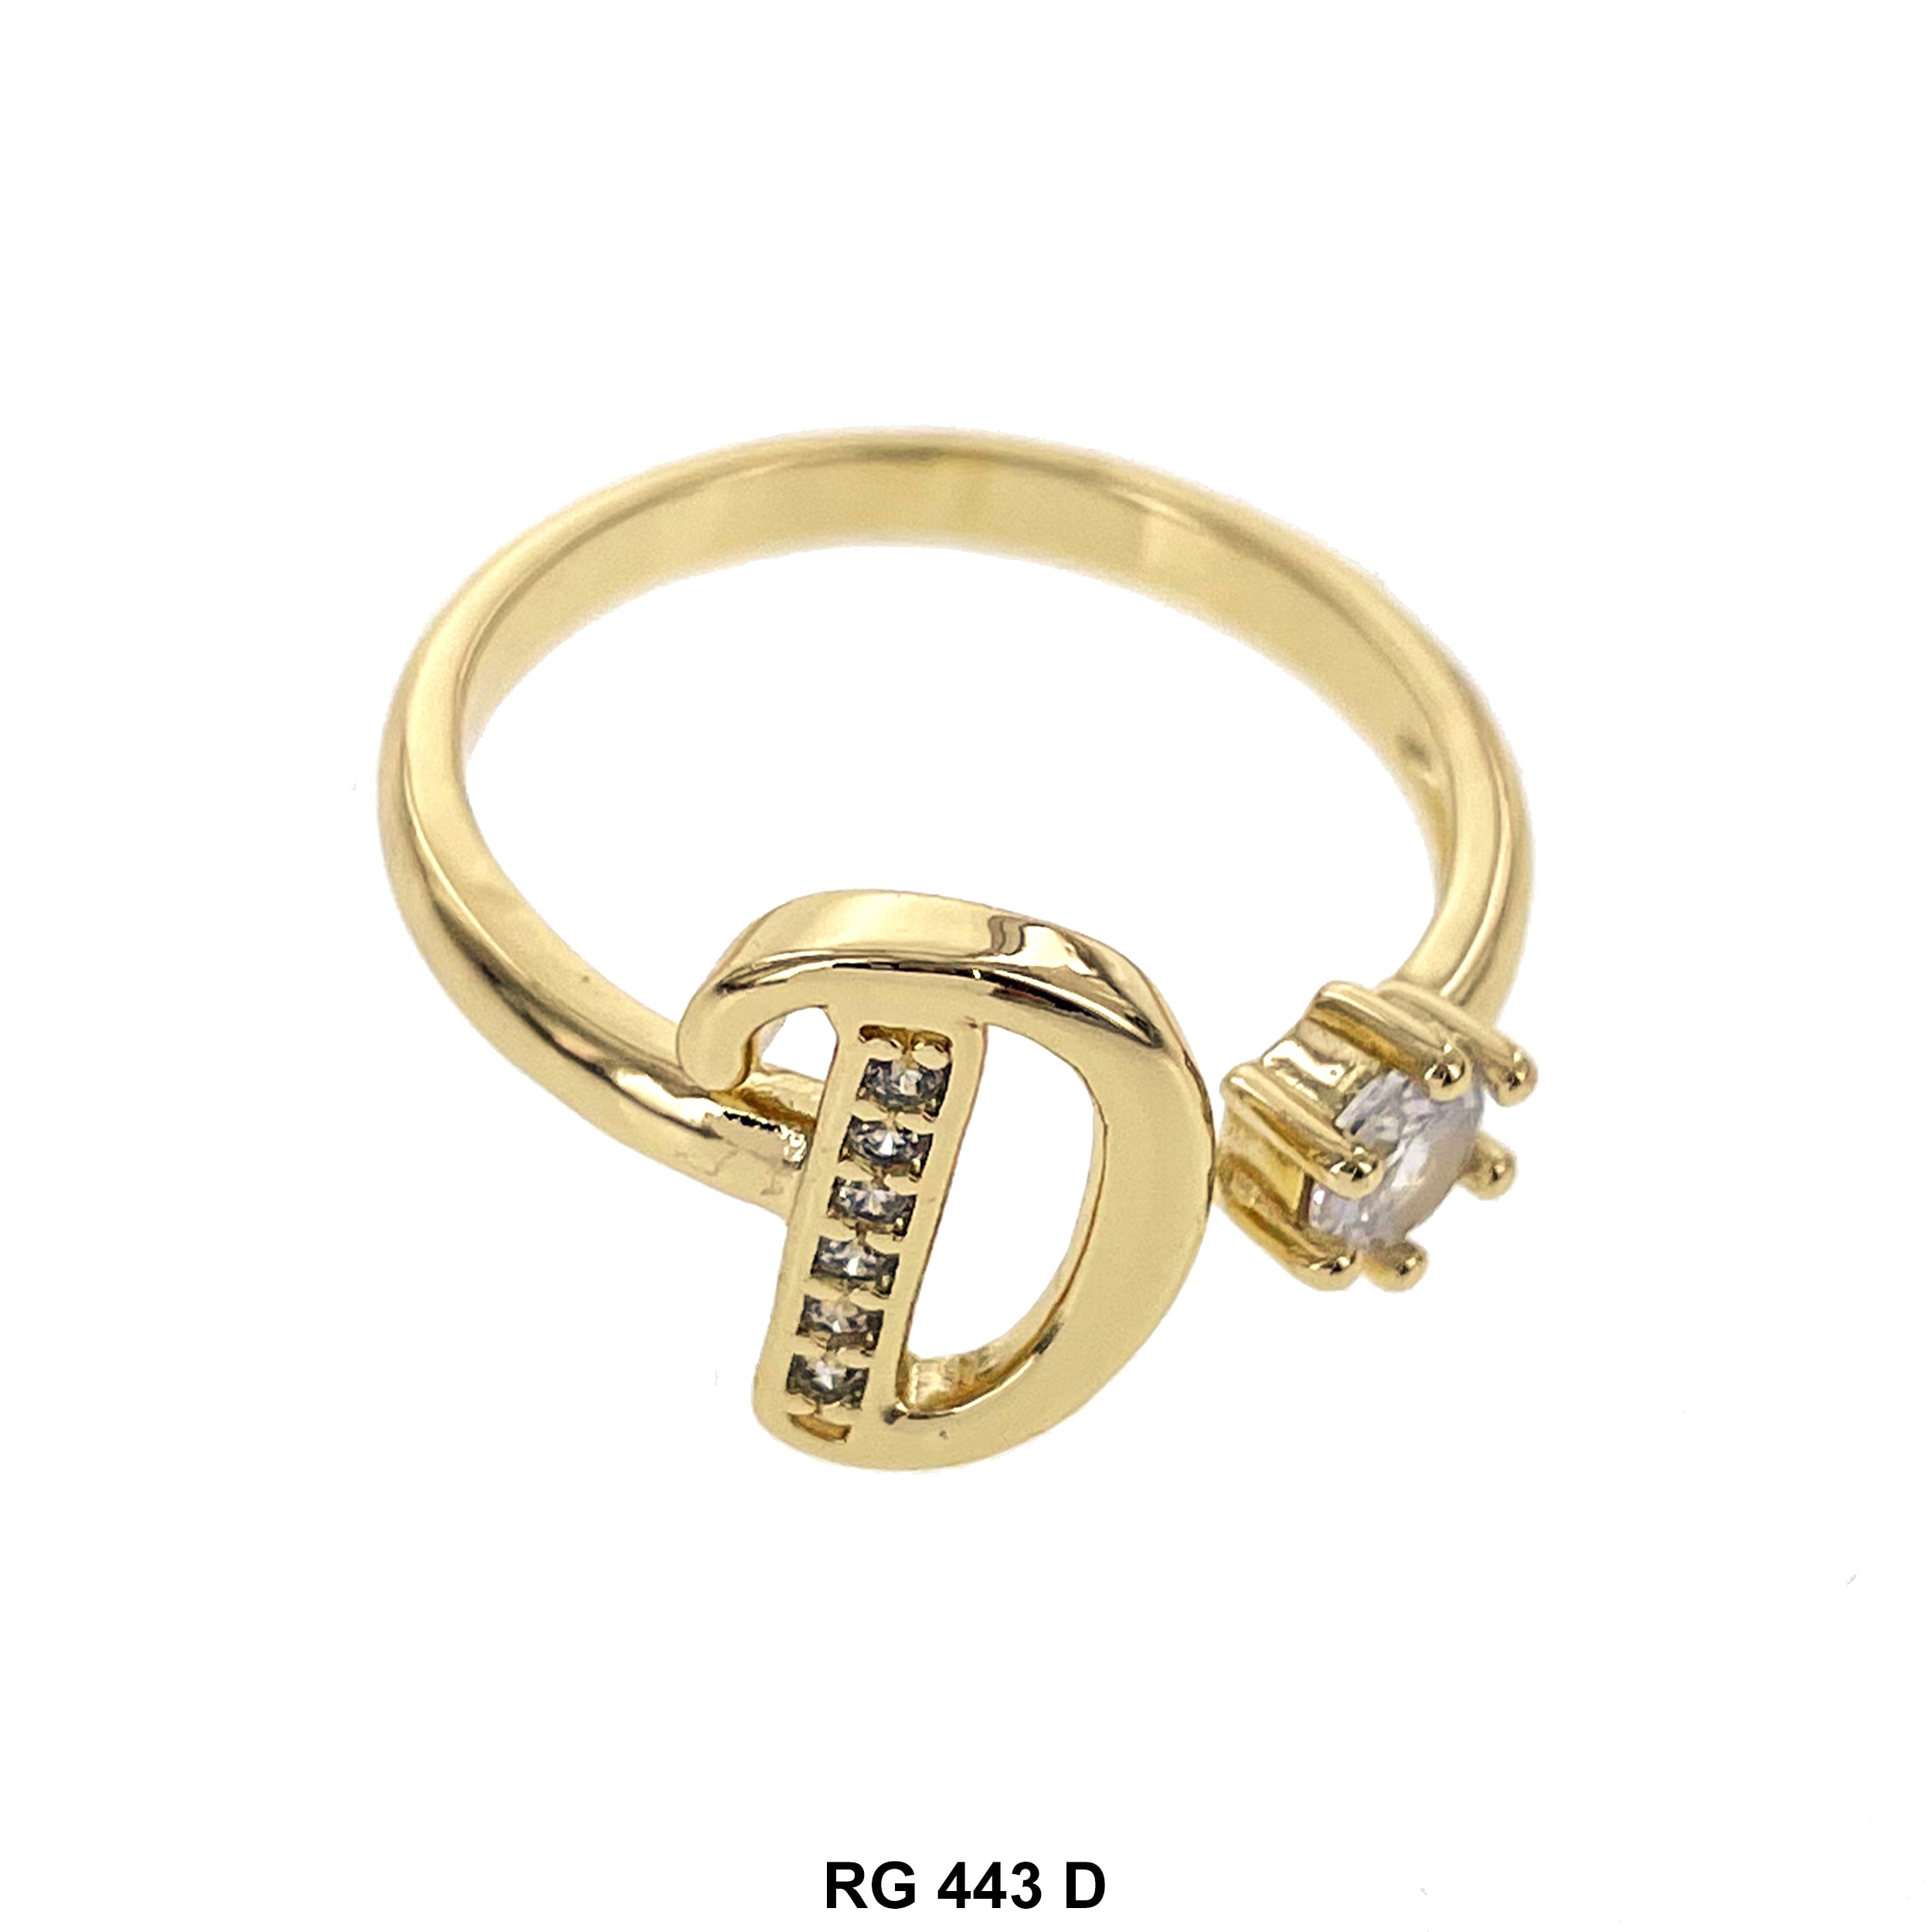 Initial Adjustable Ring RG 443 D